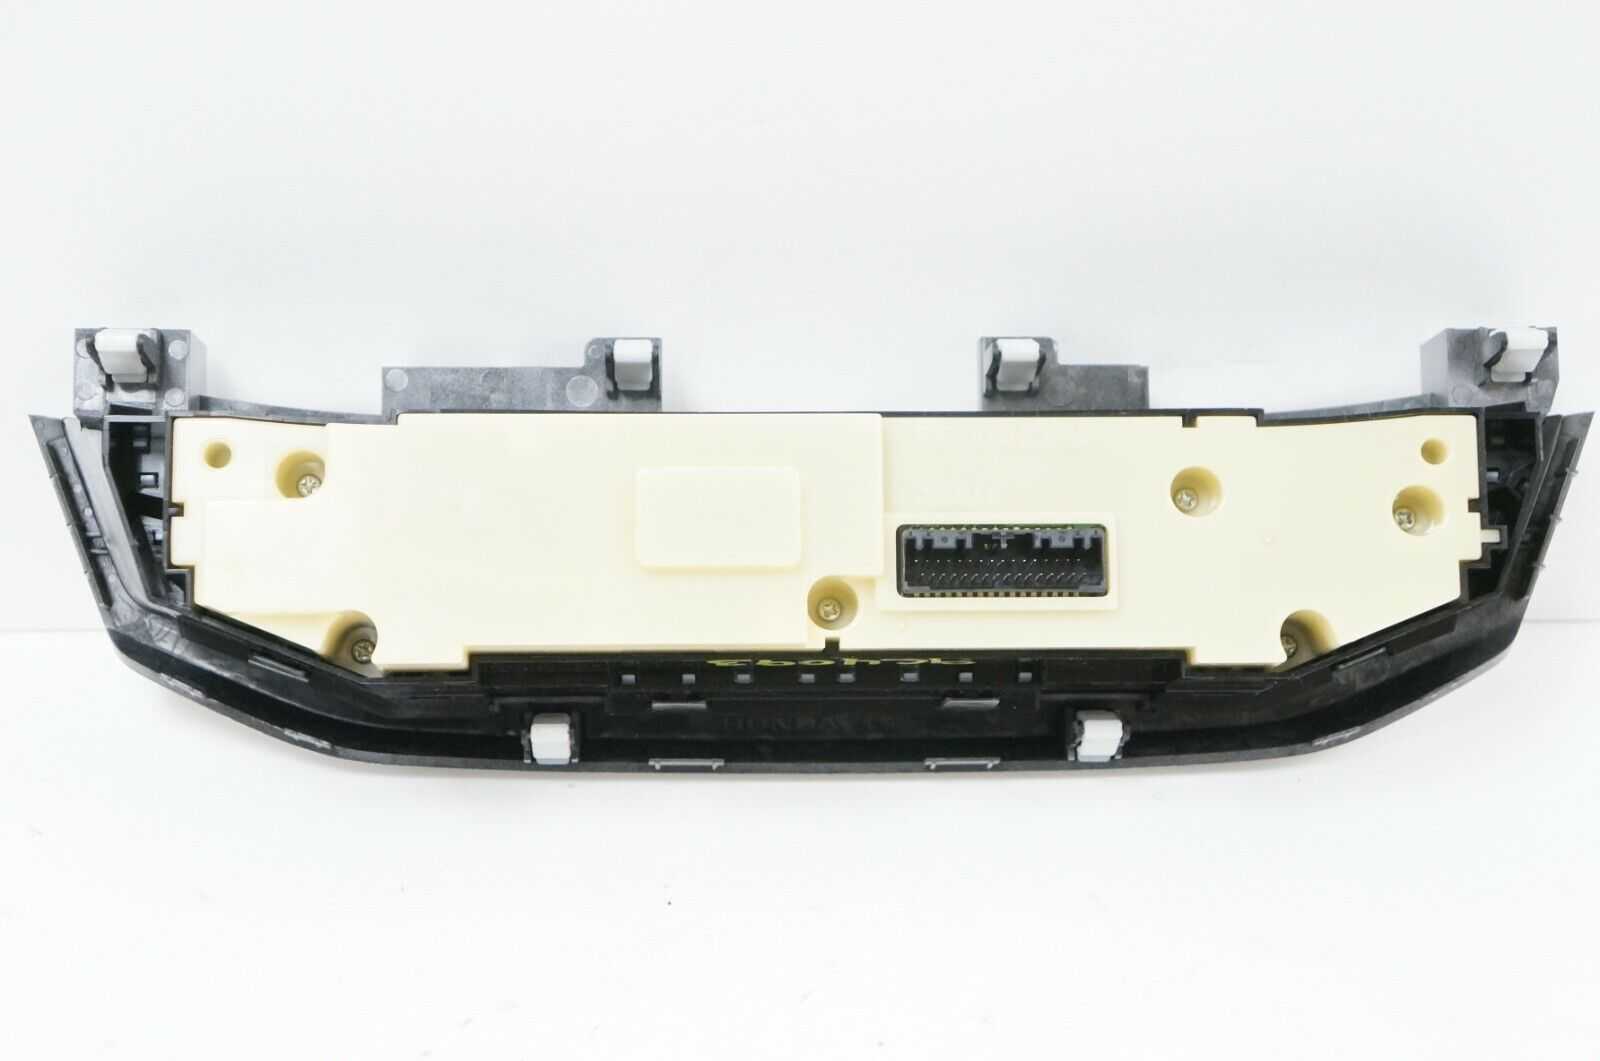 13-15 Honda Accord Factory AC Heat Climate Control ID 79600 T2F A611 M1 OEM Alshned Auto Parts